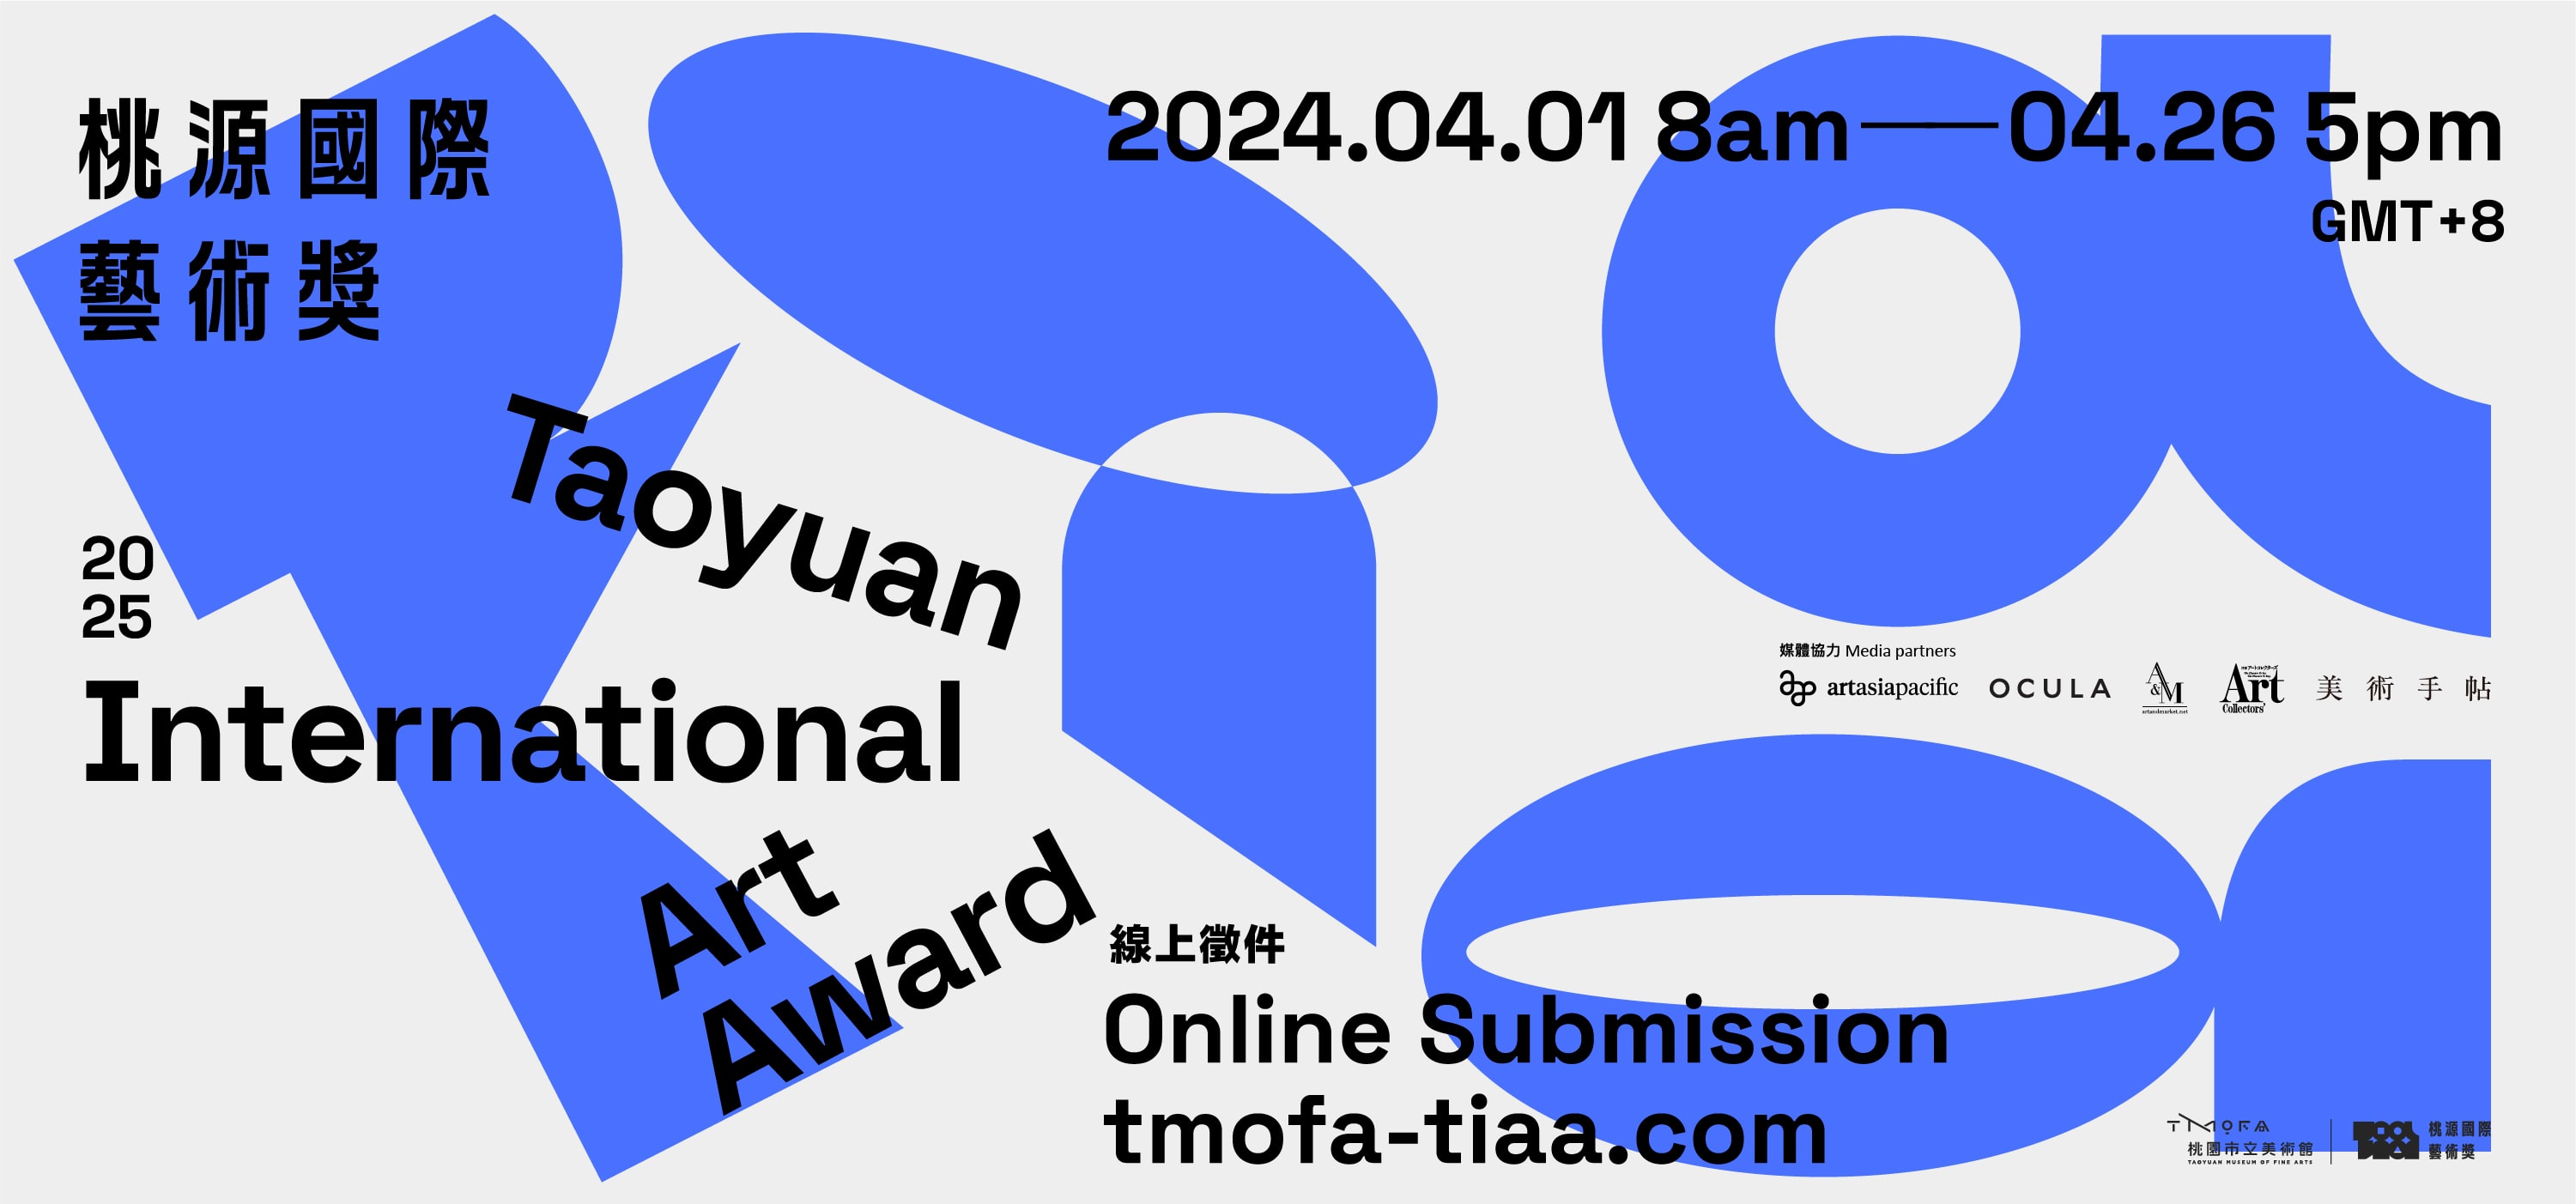 2025 Taoyuan International Art Award Global Call for Entries from 1 to 26 April 2024